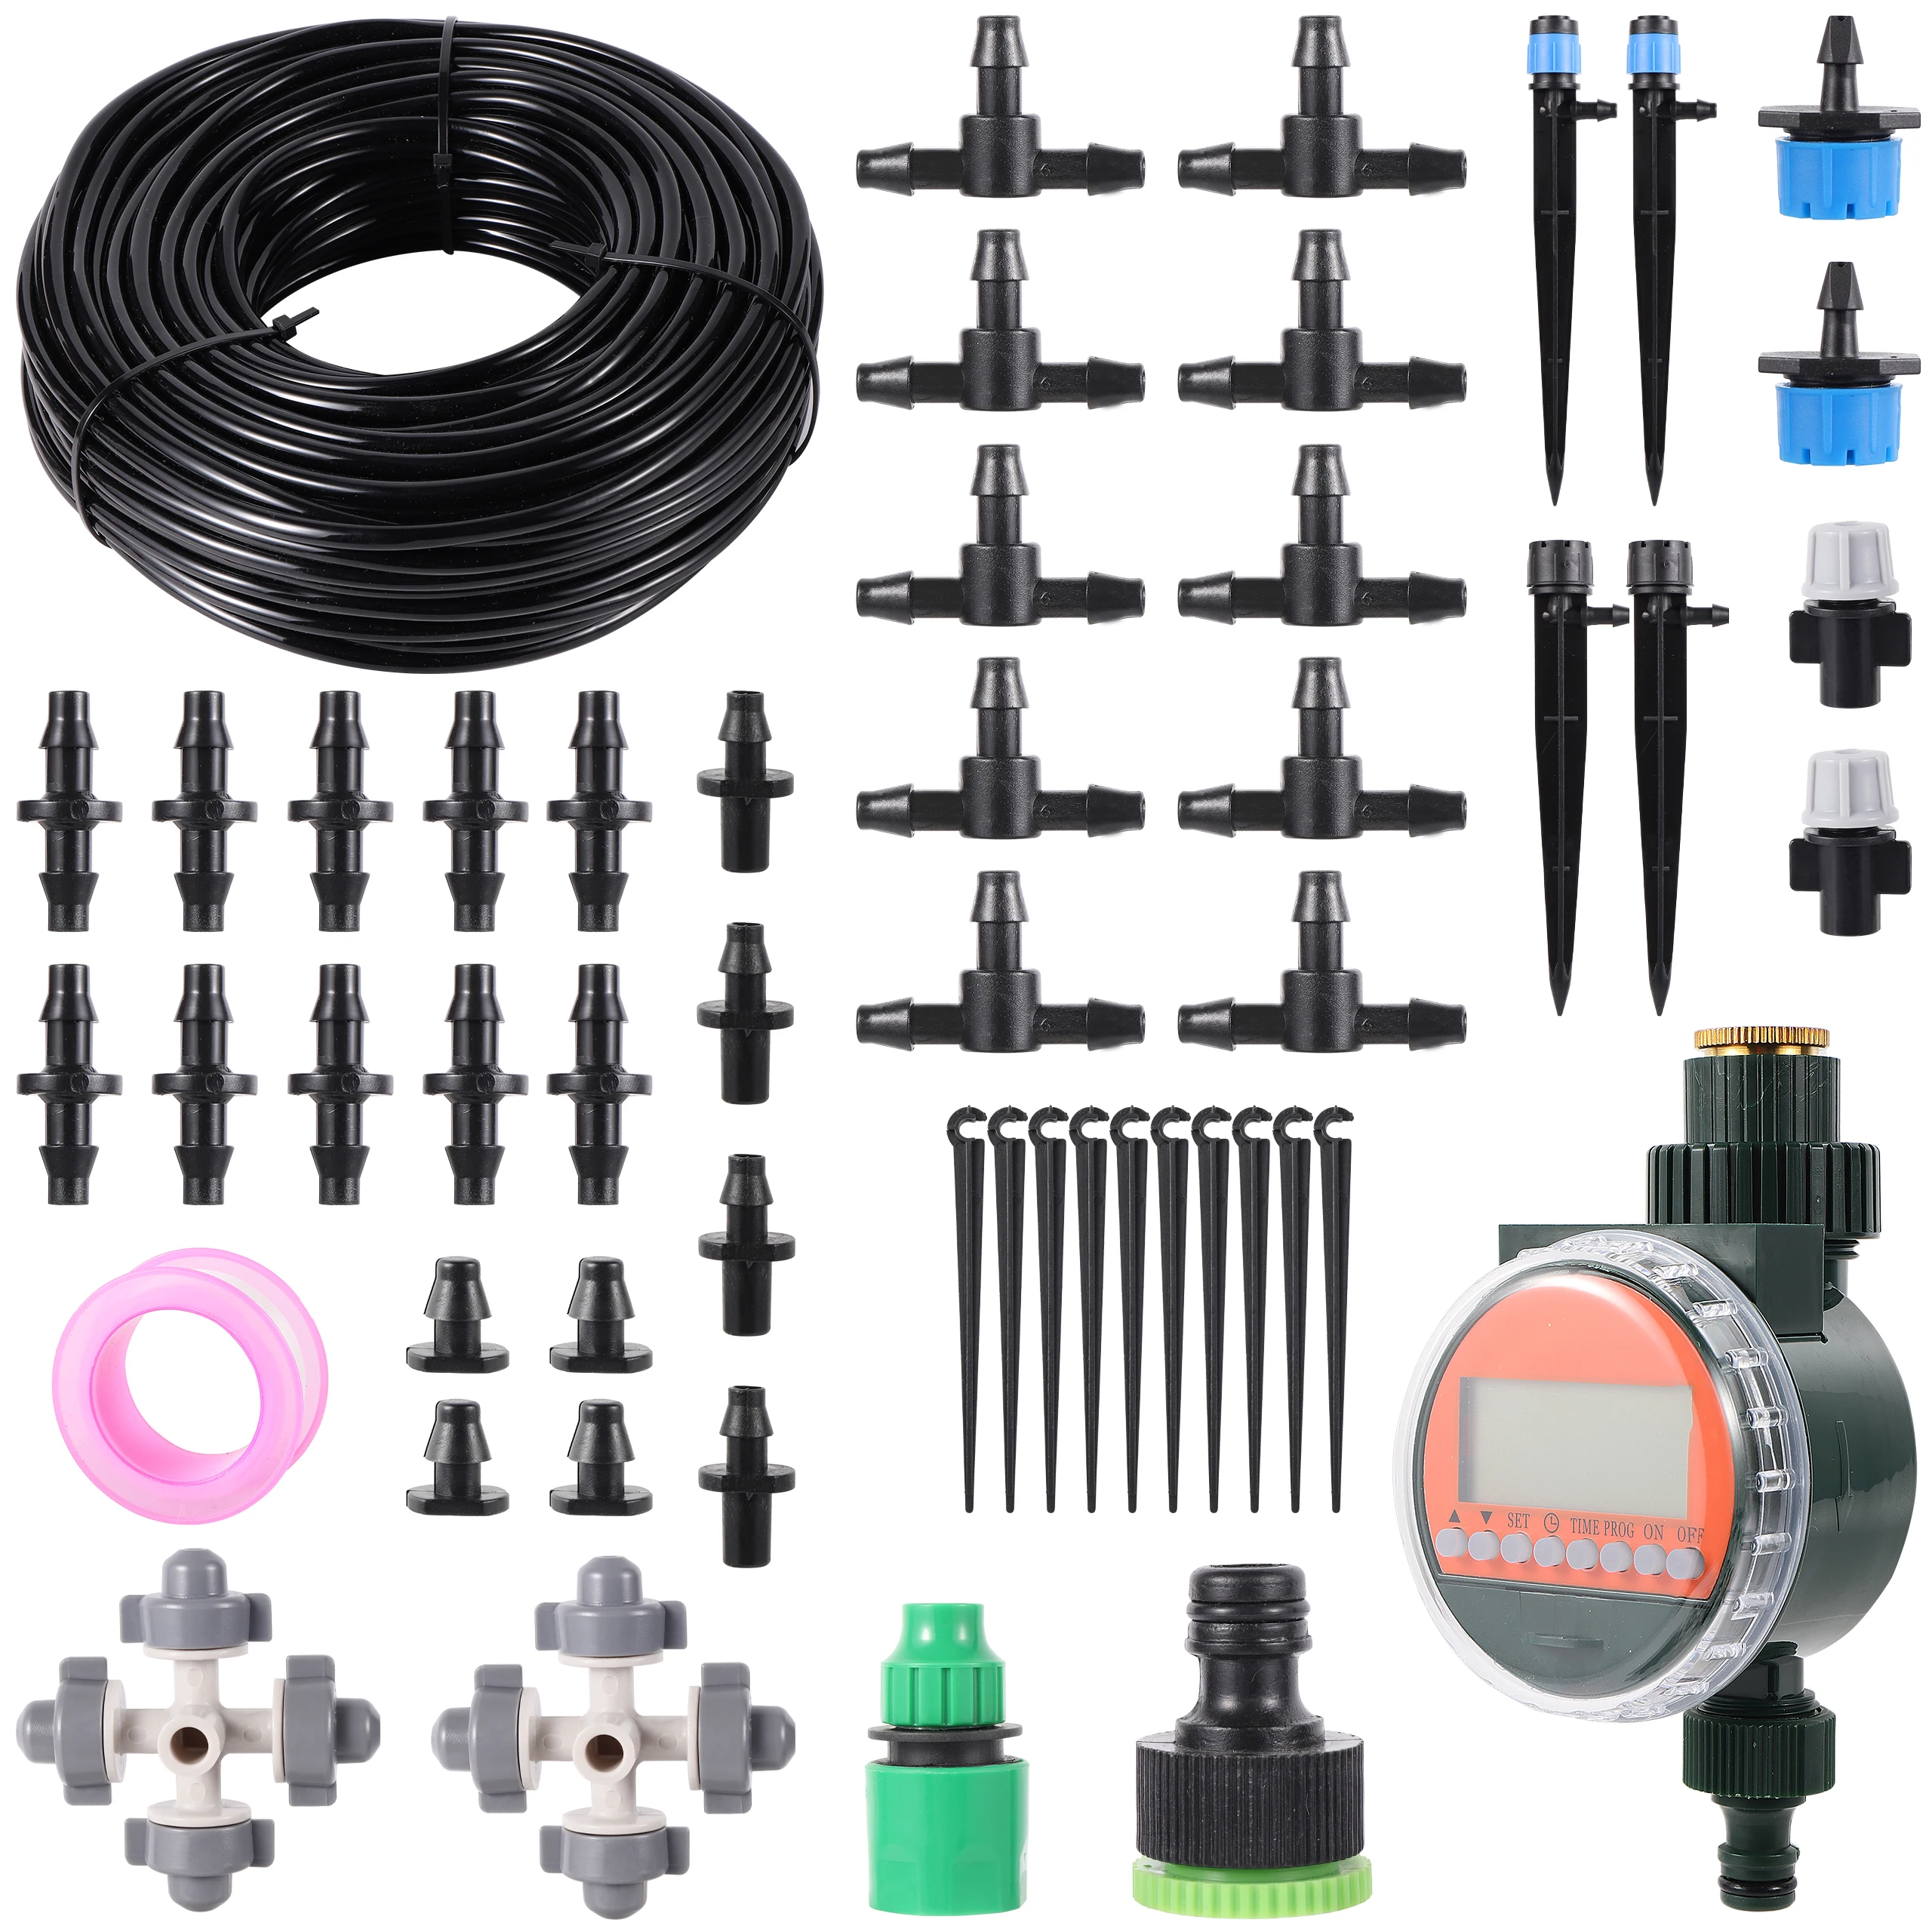 10m To 40m 4/7mm Hose Garden Pot Irrigation Set, Automatic Programmable Watering Timer, Ground Sprinkler, Various Accessories